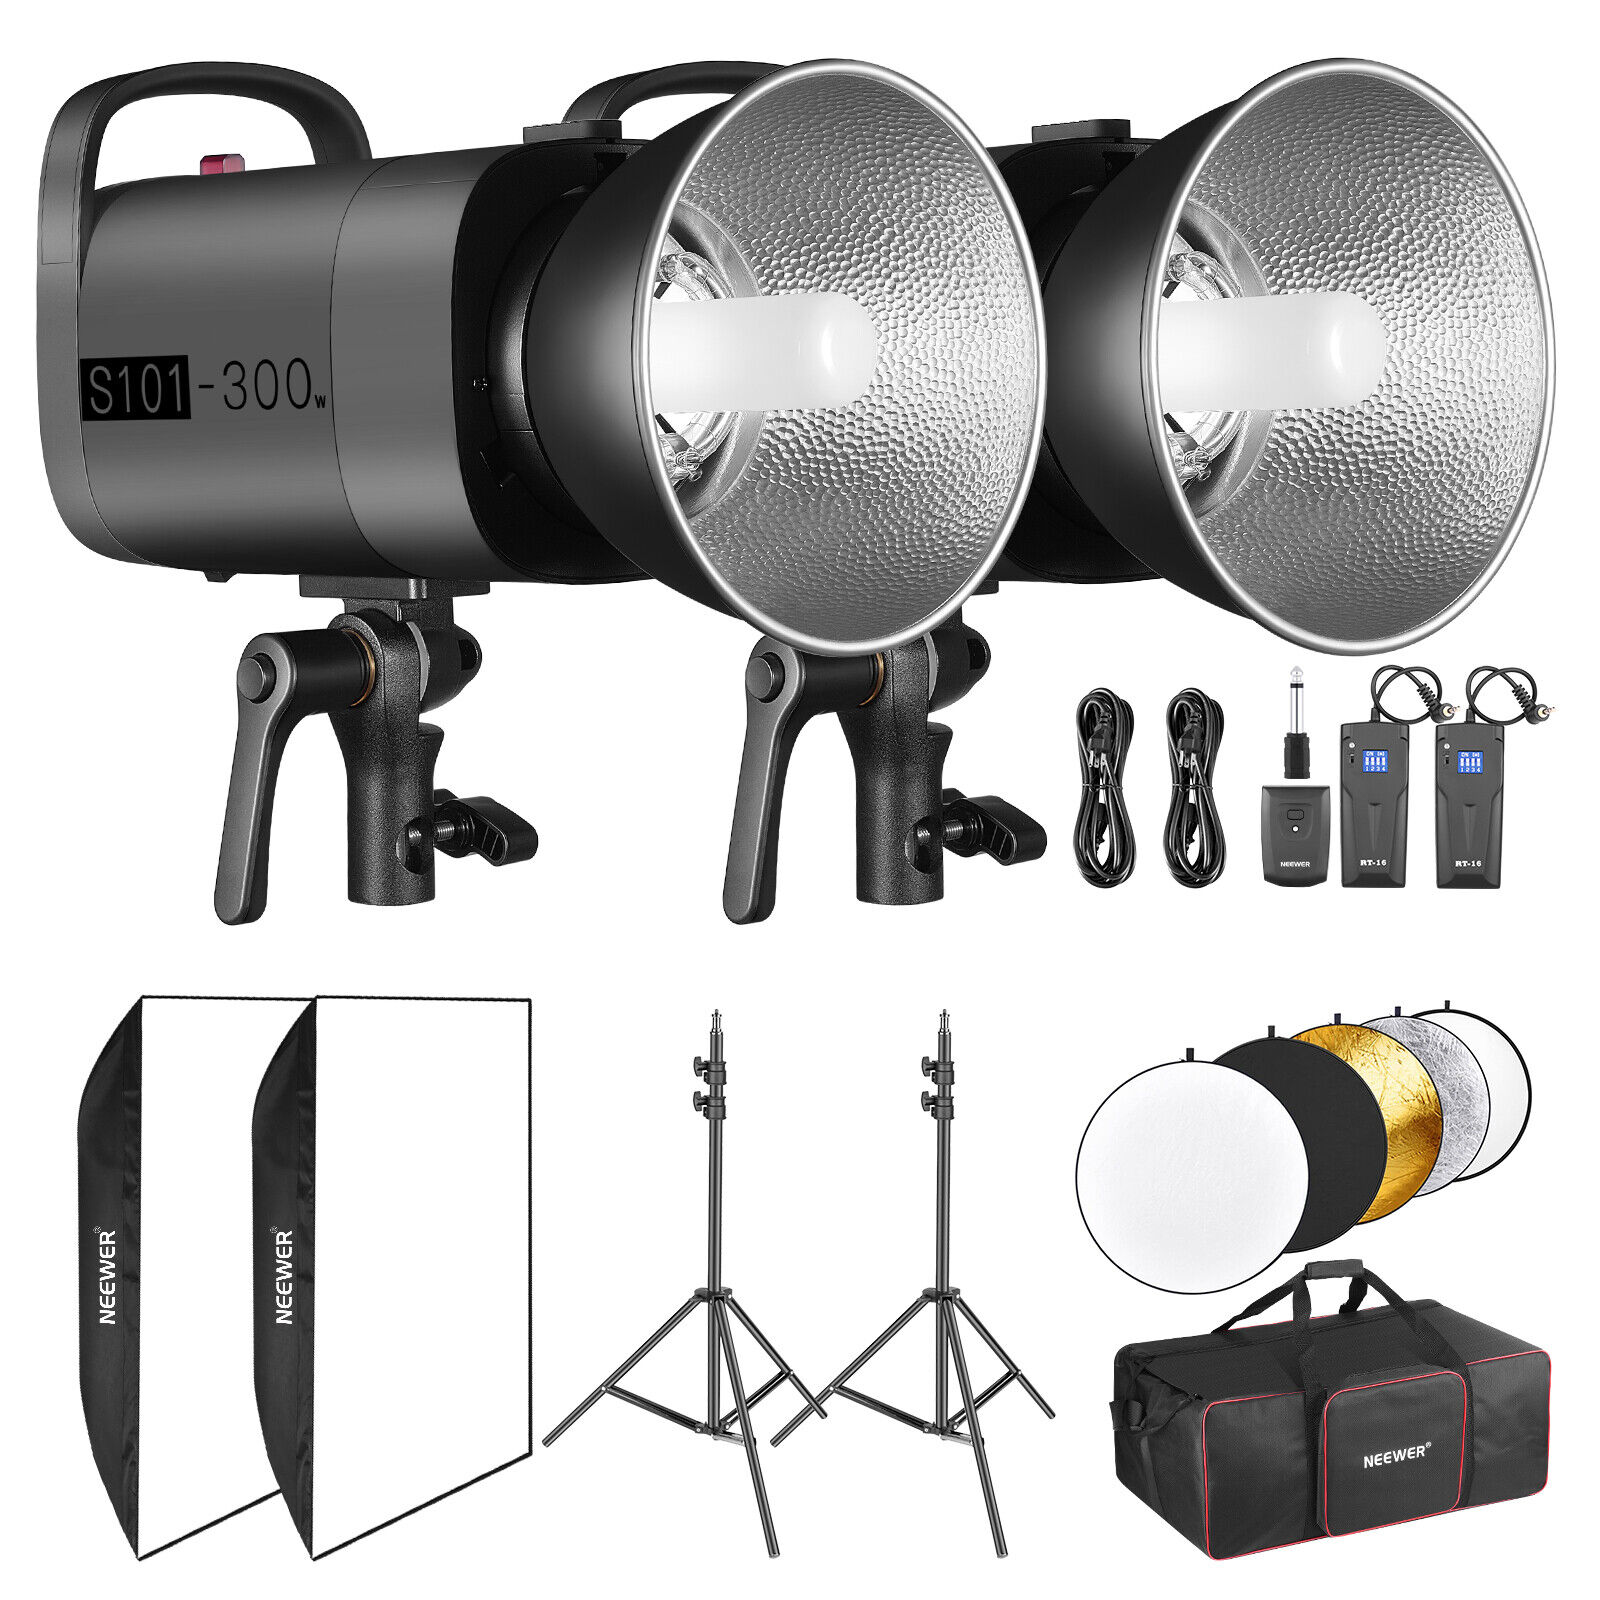 Neewer 2 Pack S101 300W 5600K Dimmable Monolights Kit with Bowens Mount